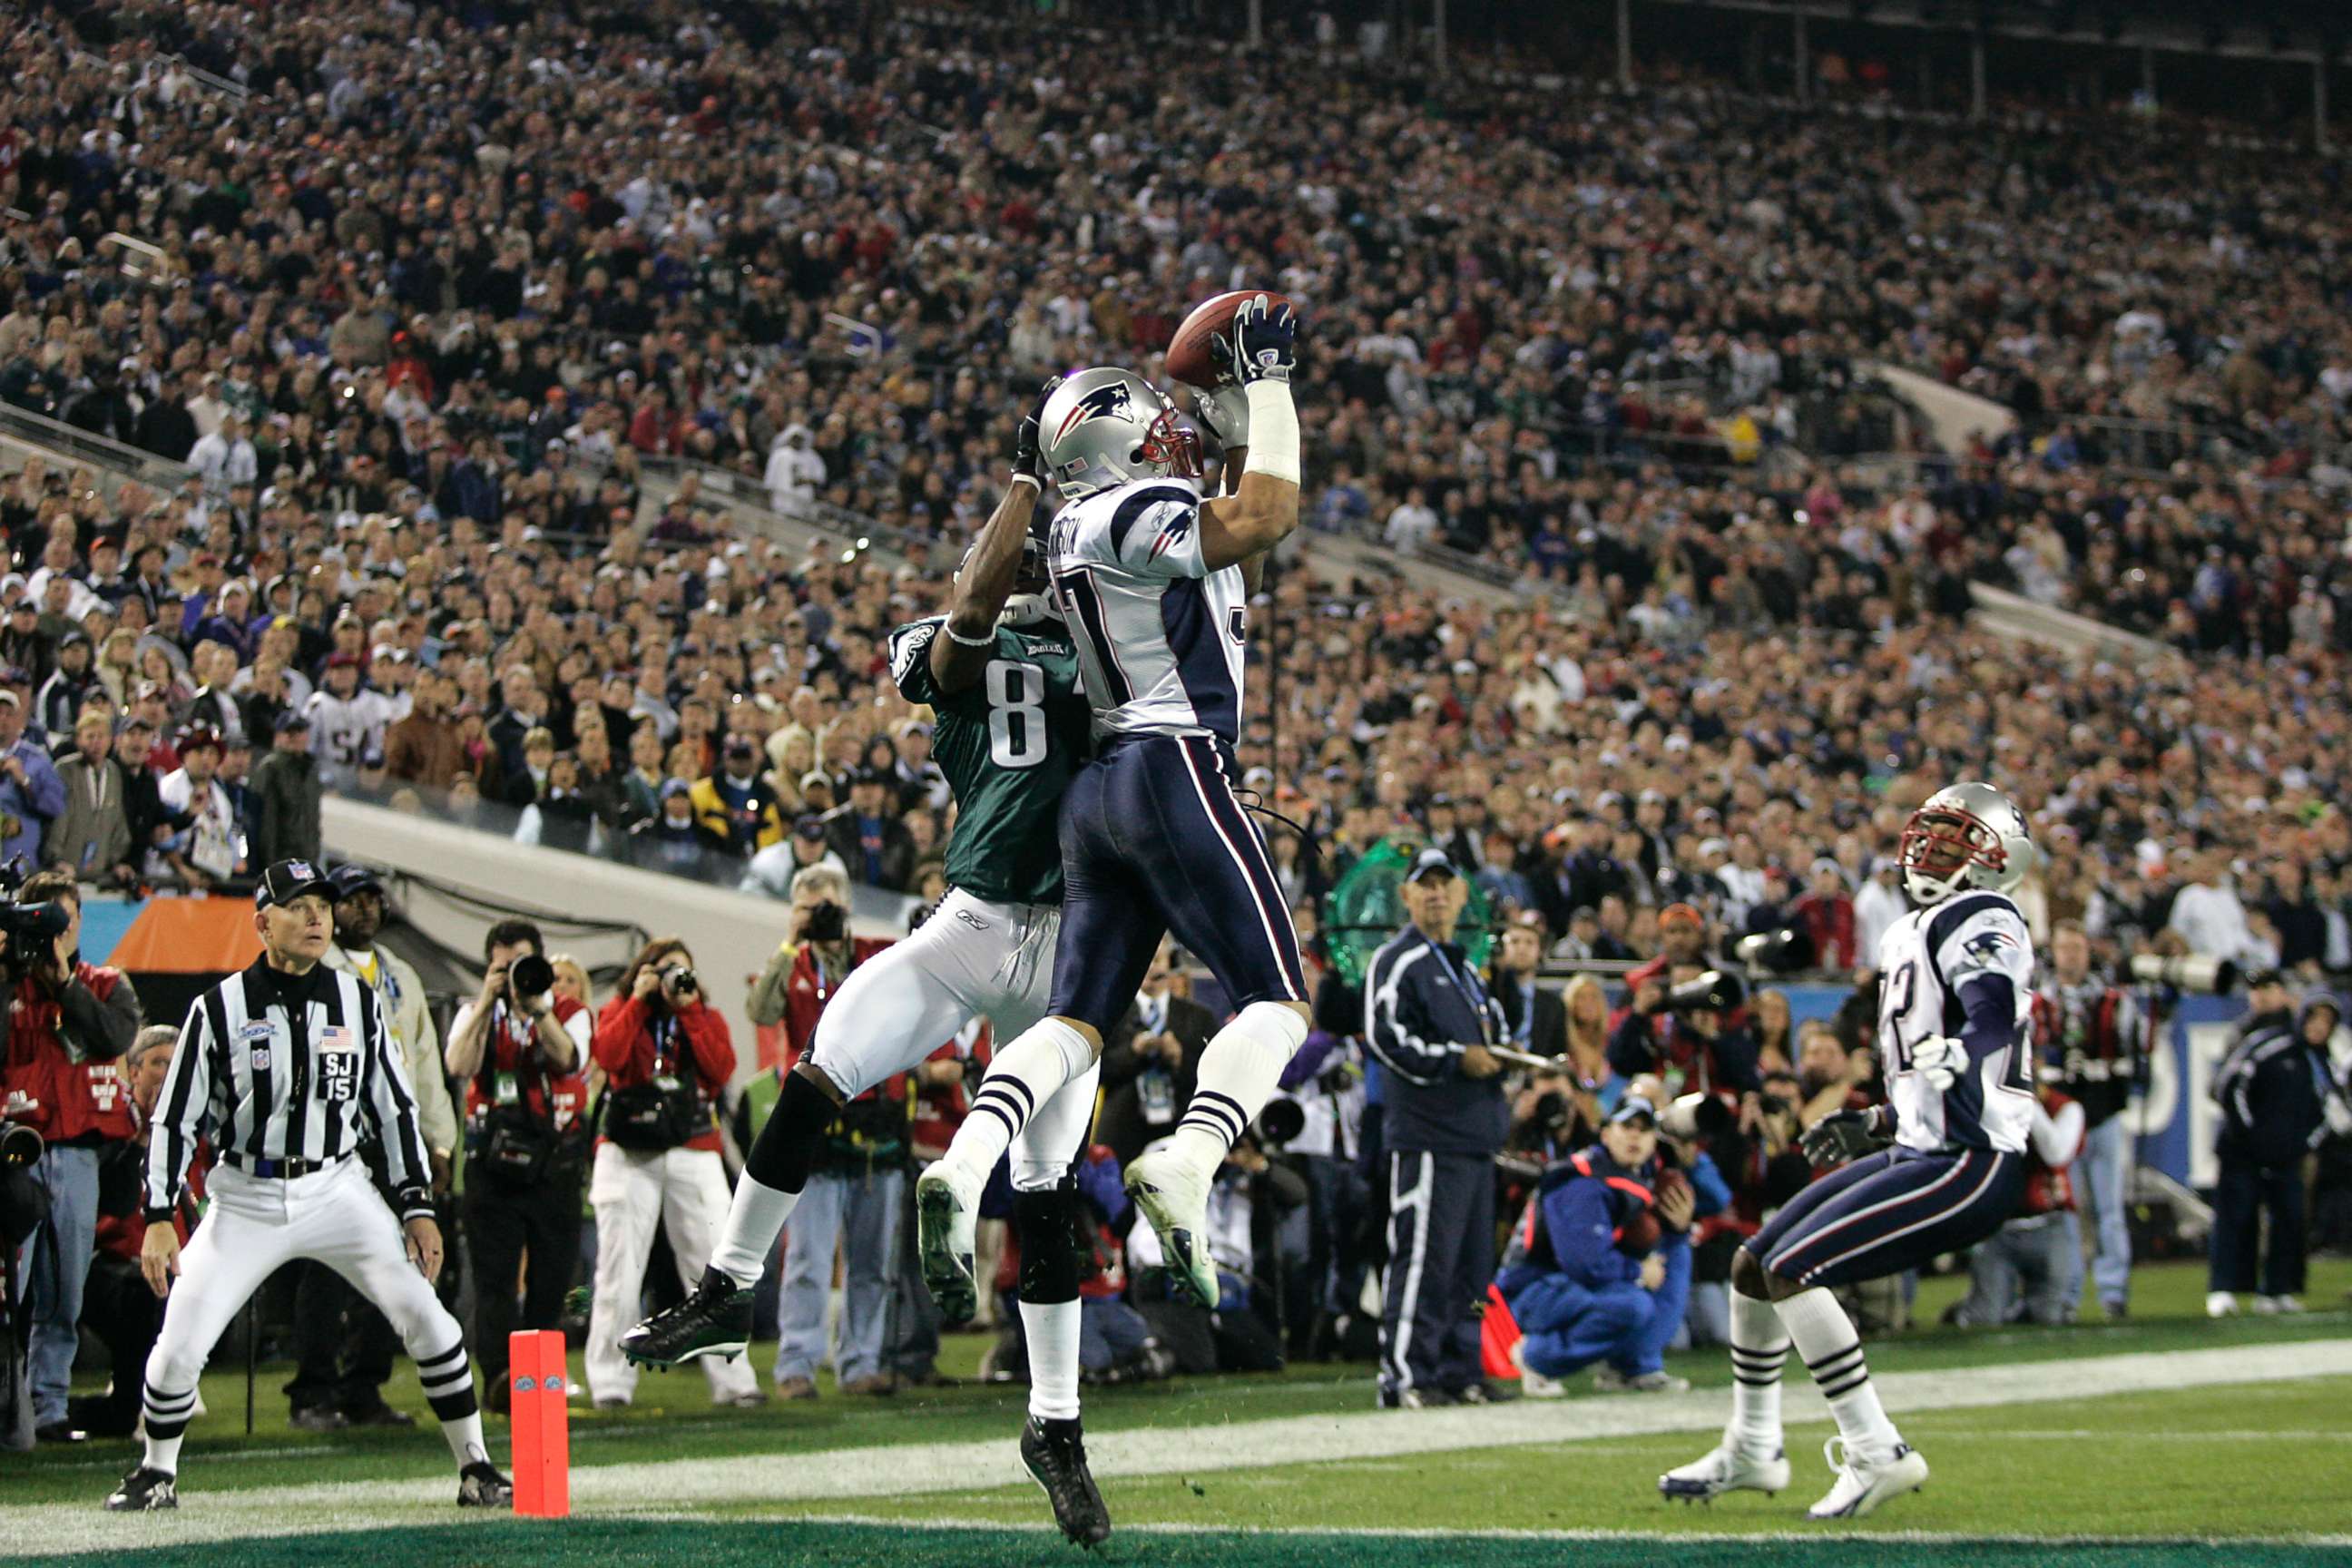 PHOTO: New England Patriots Rodney Harrison leaps in the air on an attempted interception during the NFL Super Bowl XXXIX football game against the Philadelphia Eagles in Jacksonville, Fla. Feb. 6, 2005.